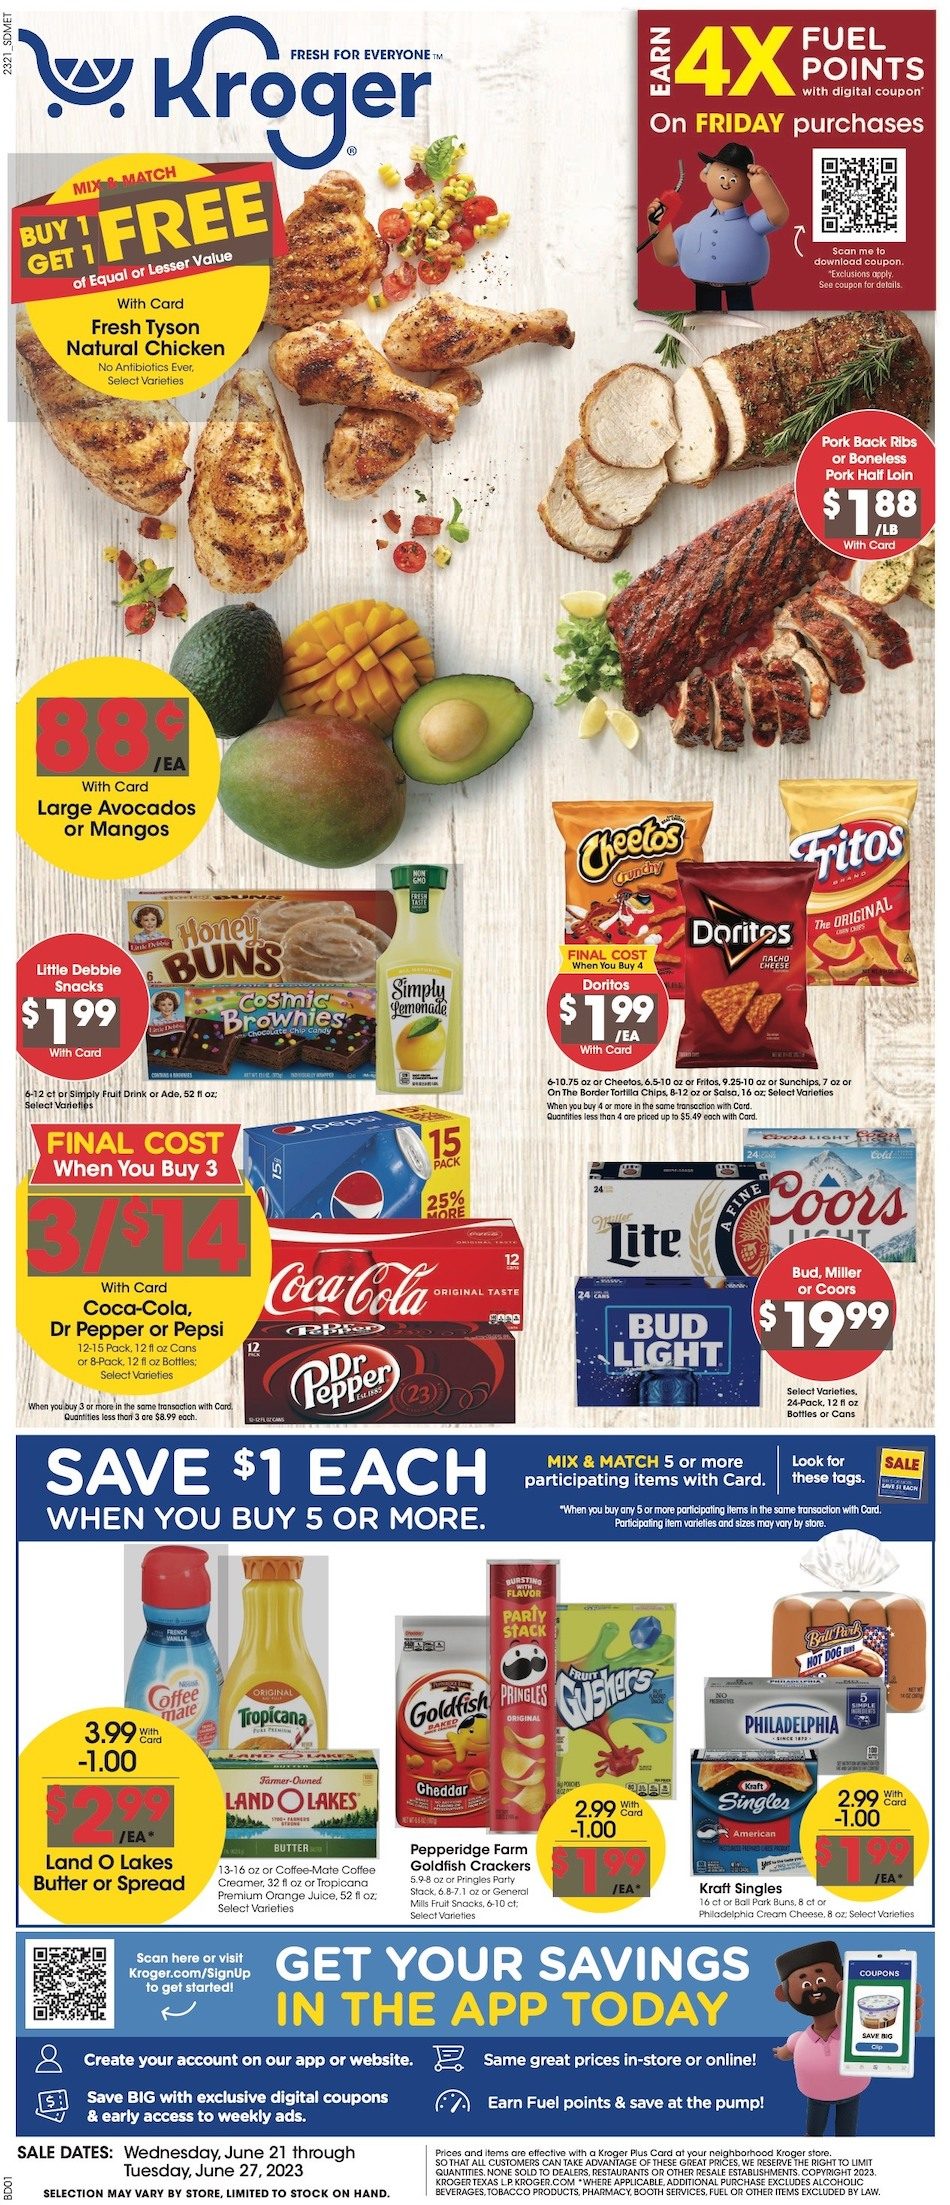 Kroger Weekly Ad 21st – 27th June 2023 Page 1